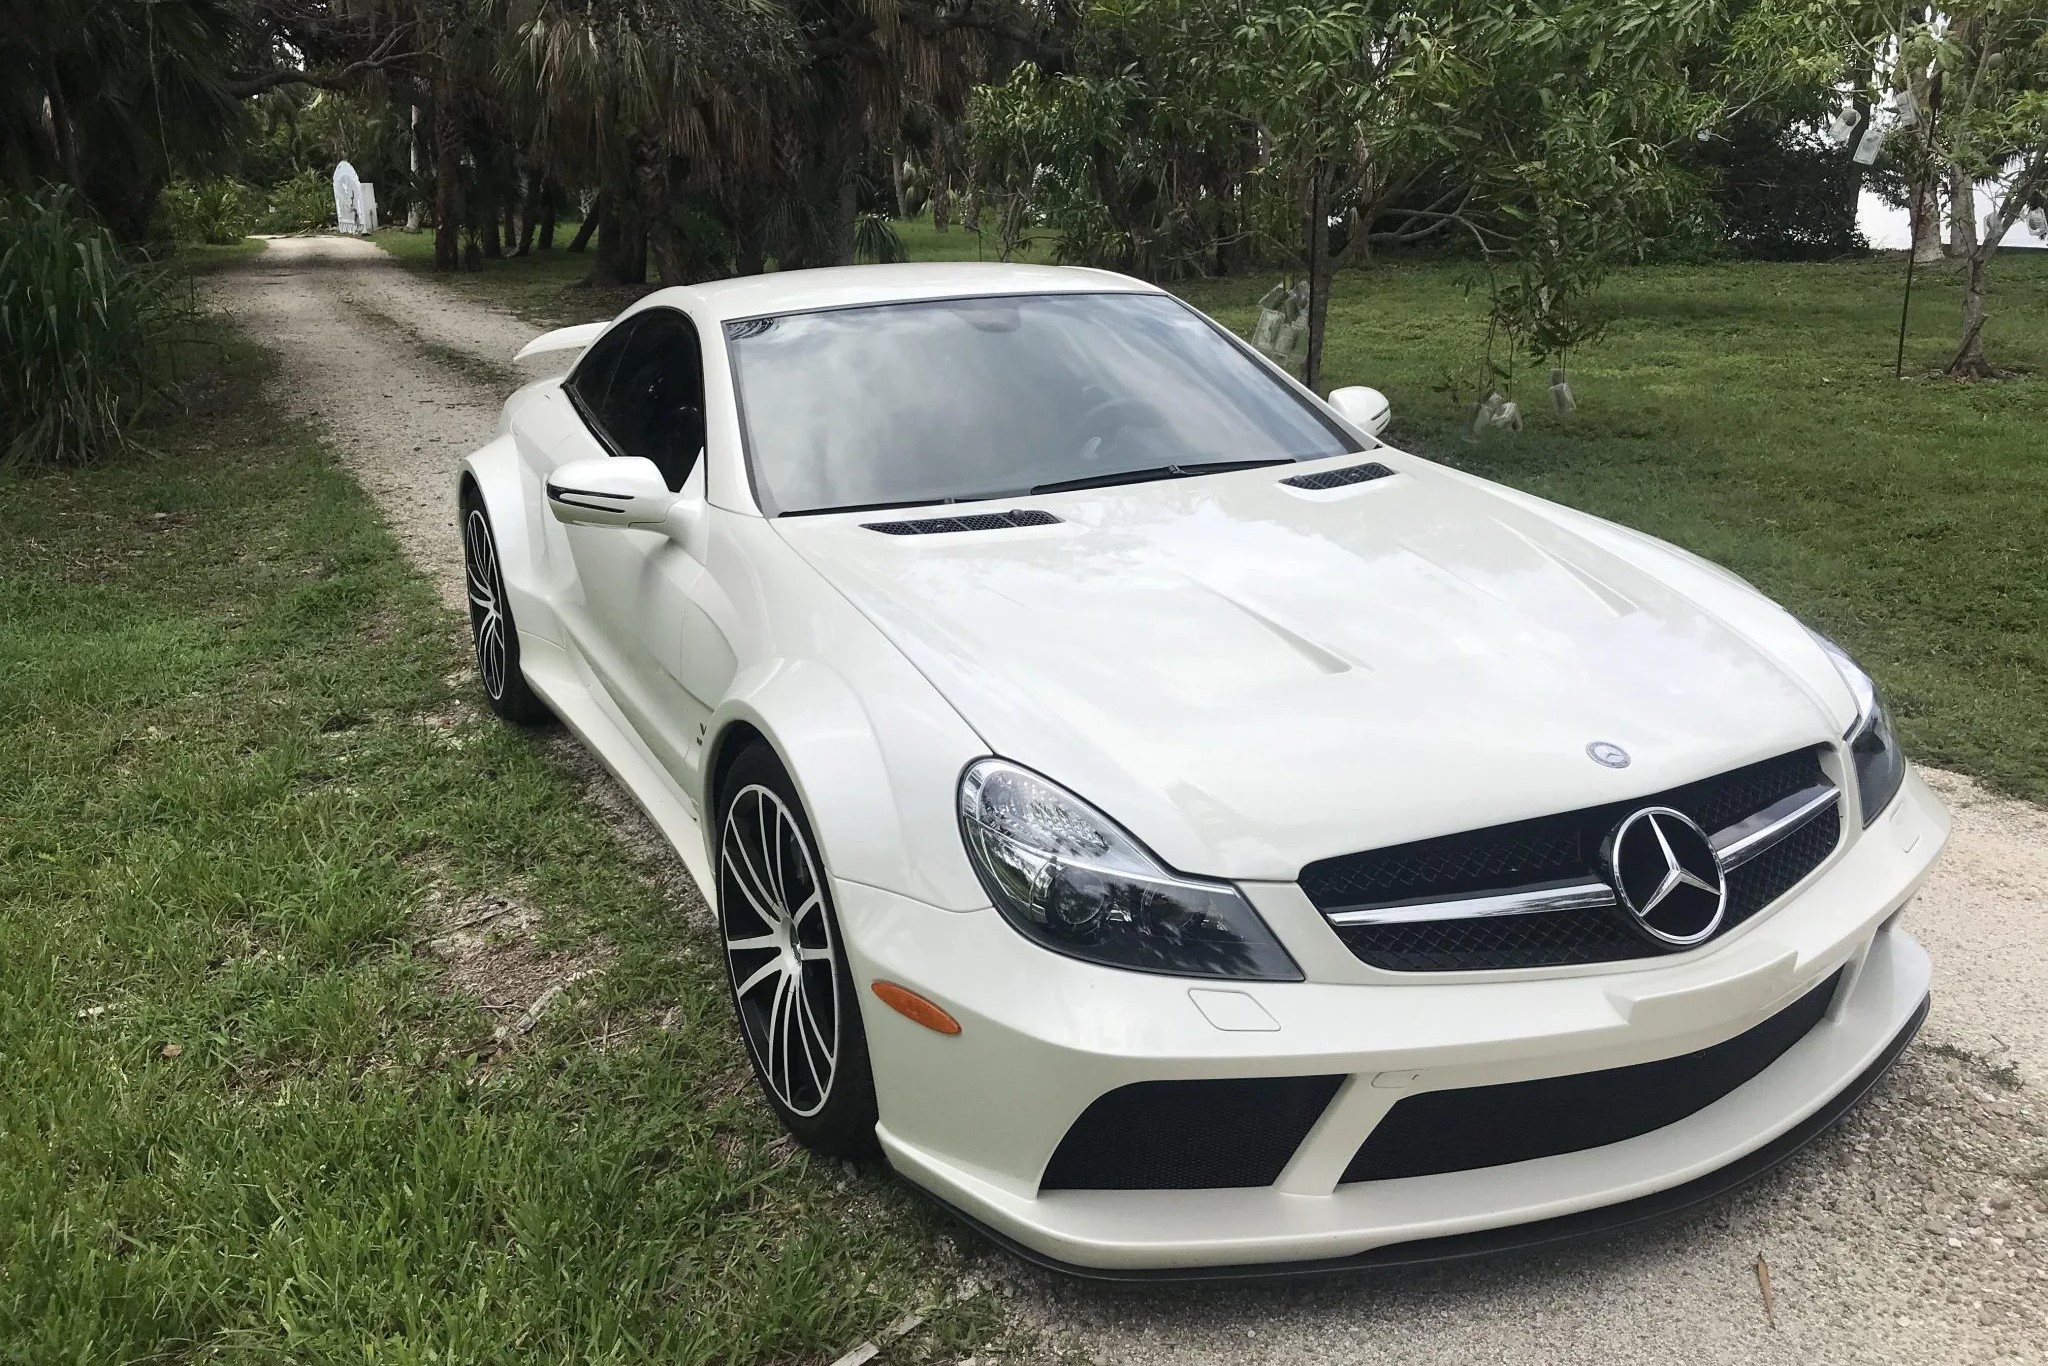 Front-angled-view of a 2009 mercedes benz sl65 amg black series